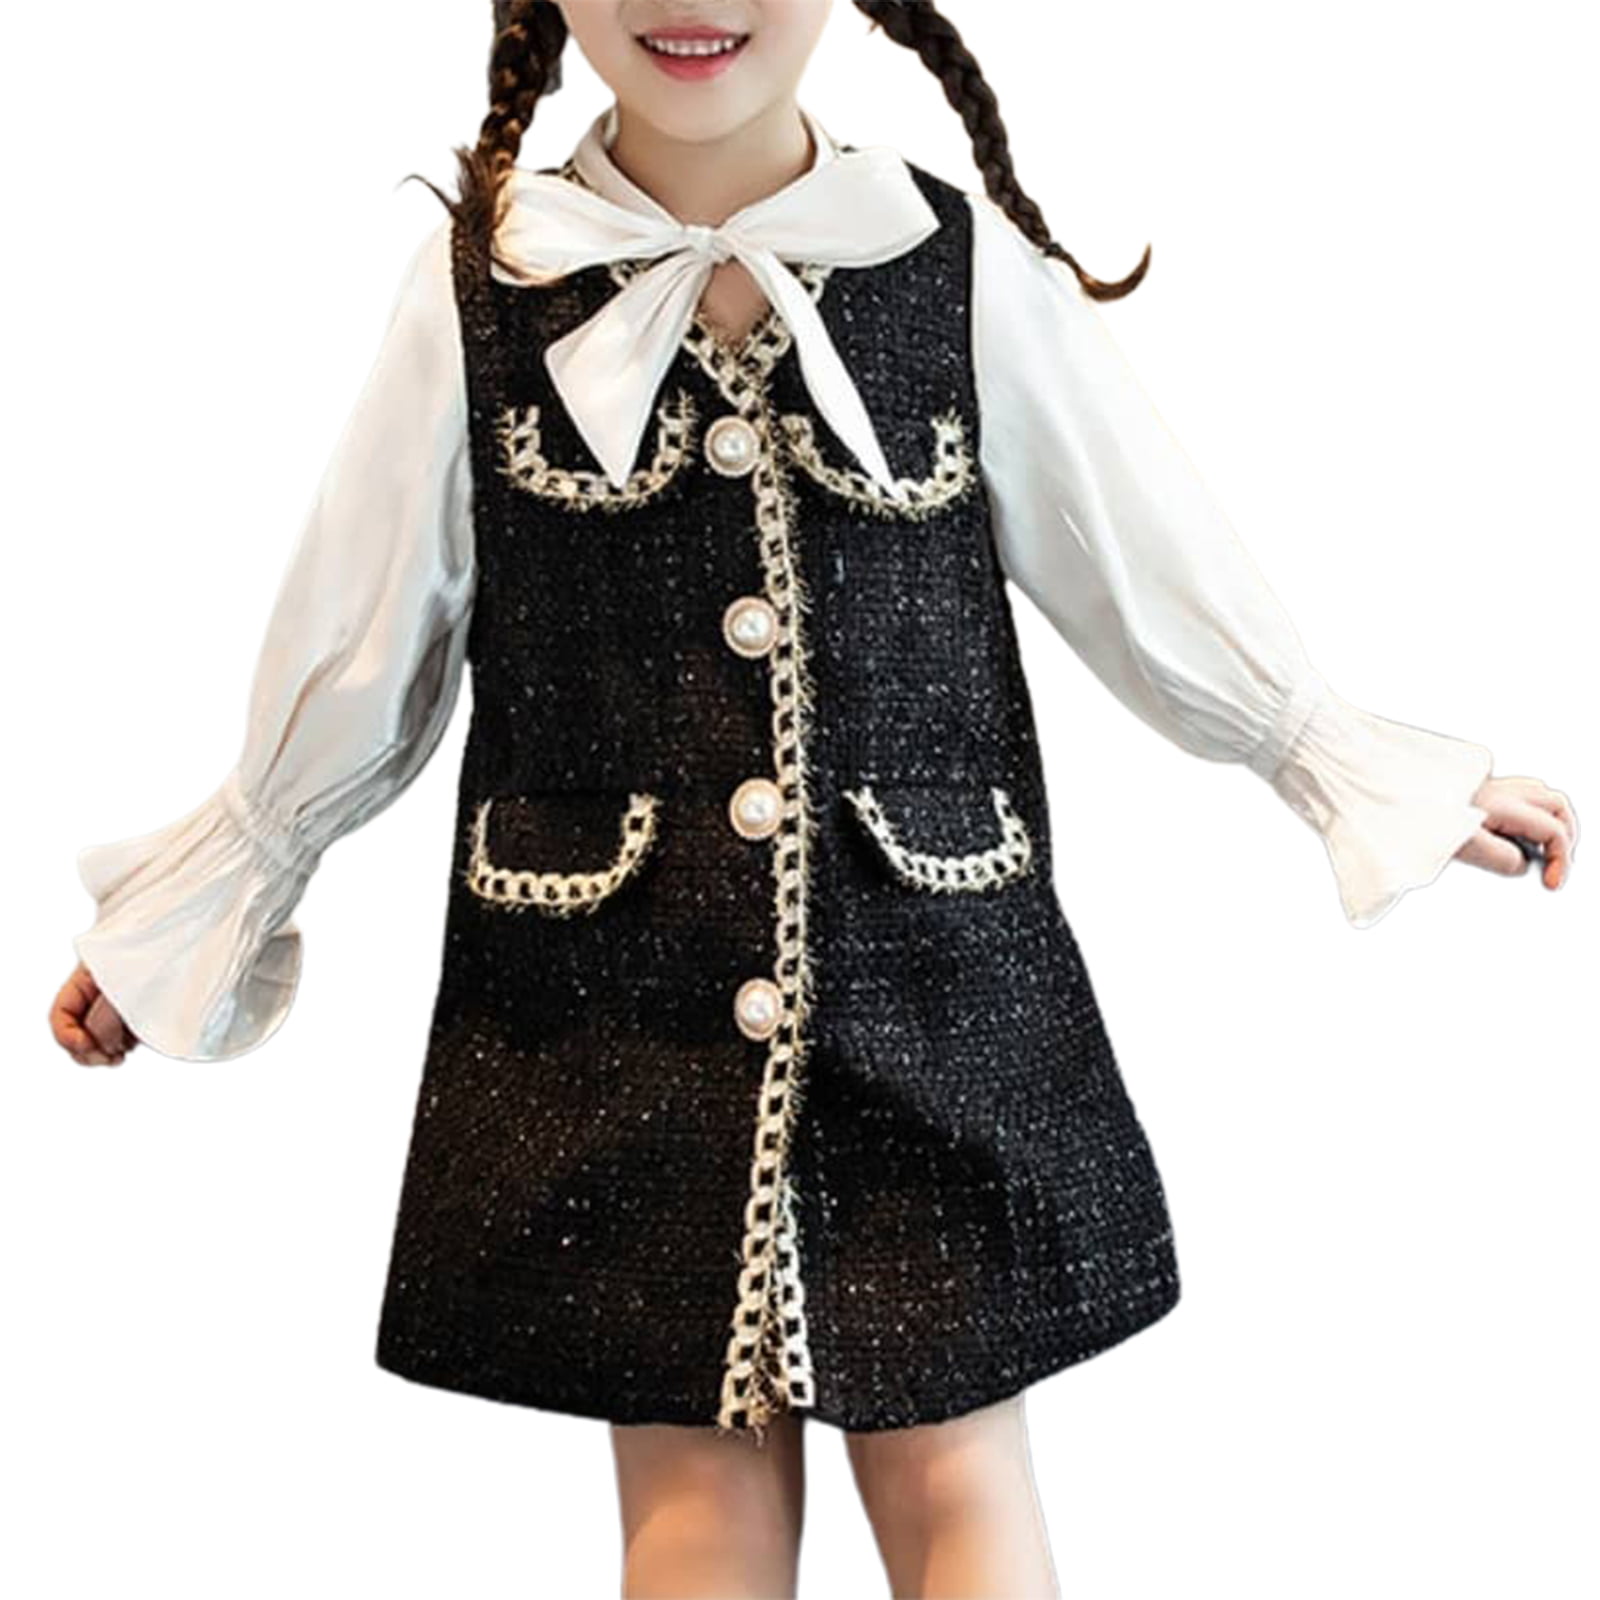 Baby Girl's Party Long Sleeve Short Coat+Tutu Skirt Suit Set Outfit